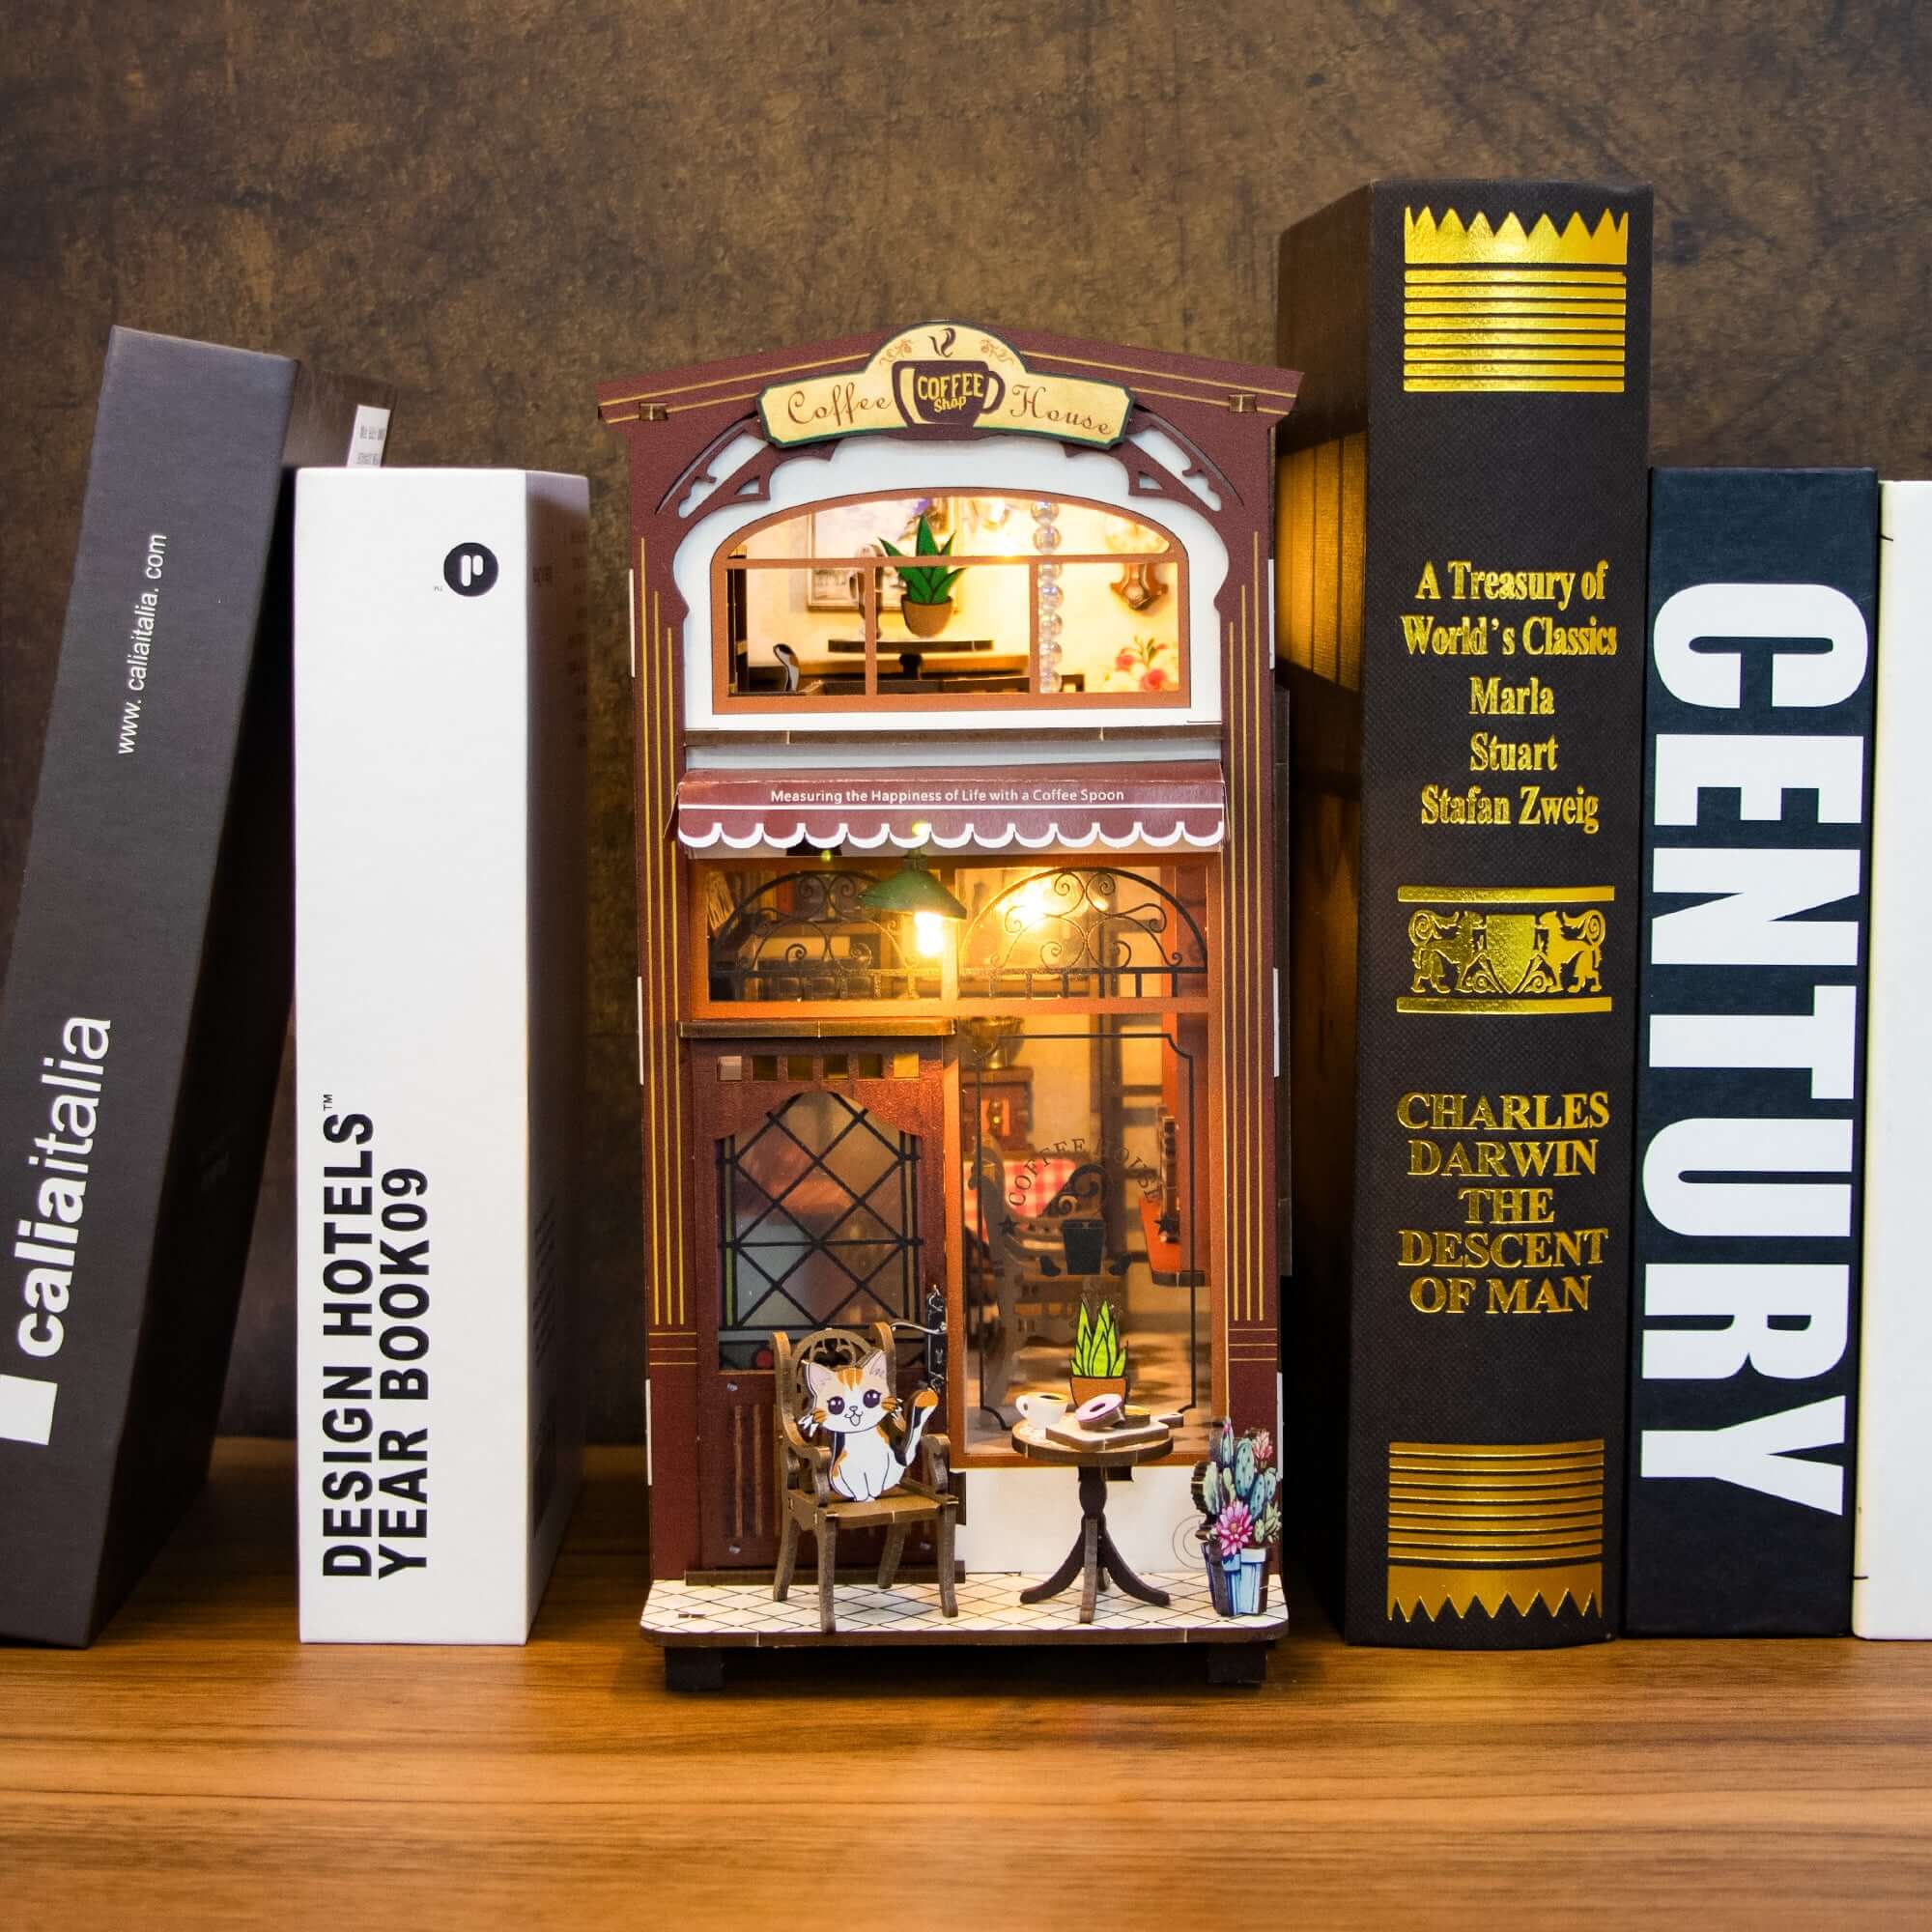 Coffee House DIY book nook music box displayed between books, perfect craft gift for bonding and relaxing